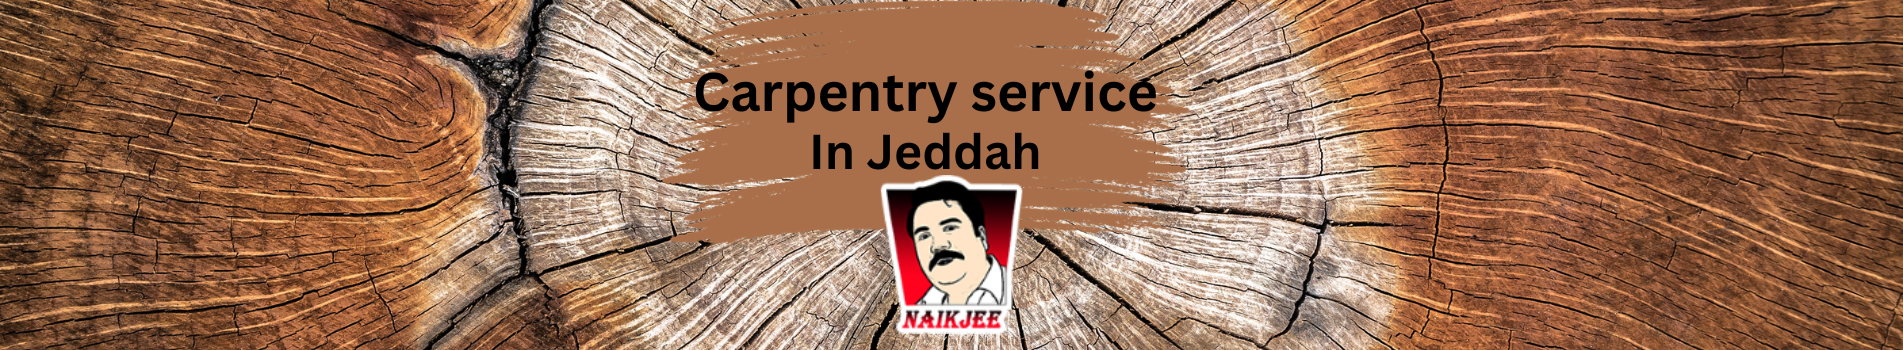 Your Complete Guide to the Best Carpentry and Handyman Services in Jeddah - Naikjee